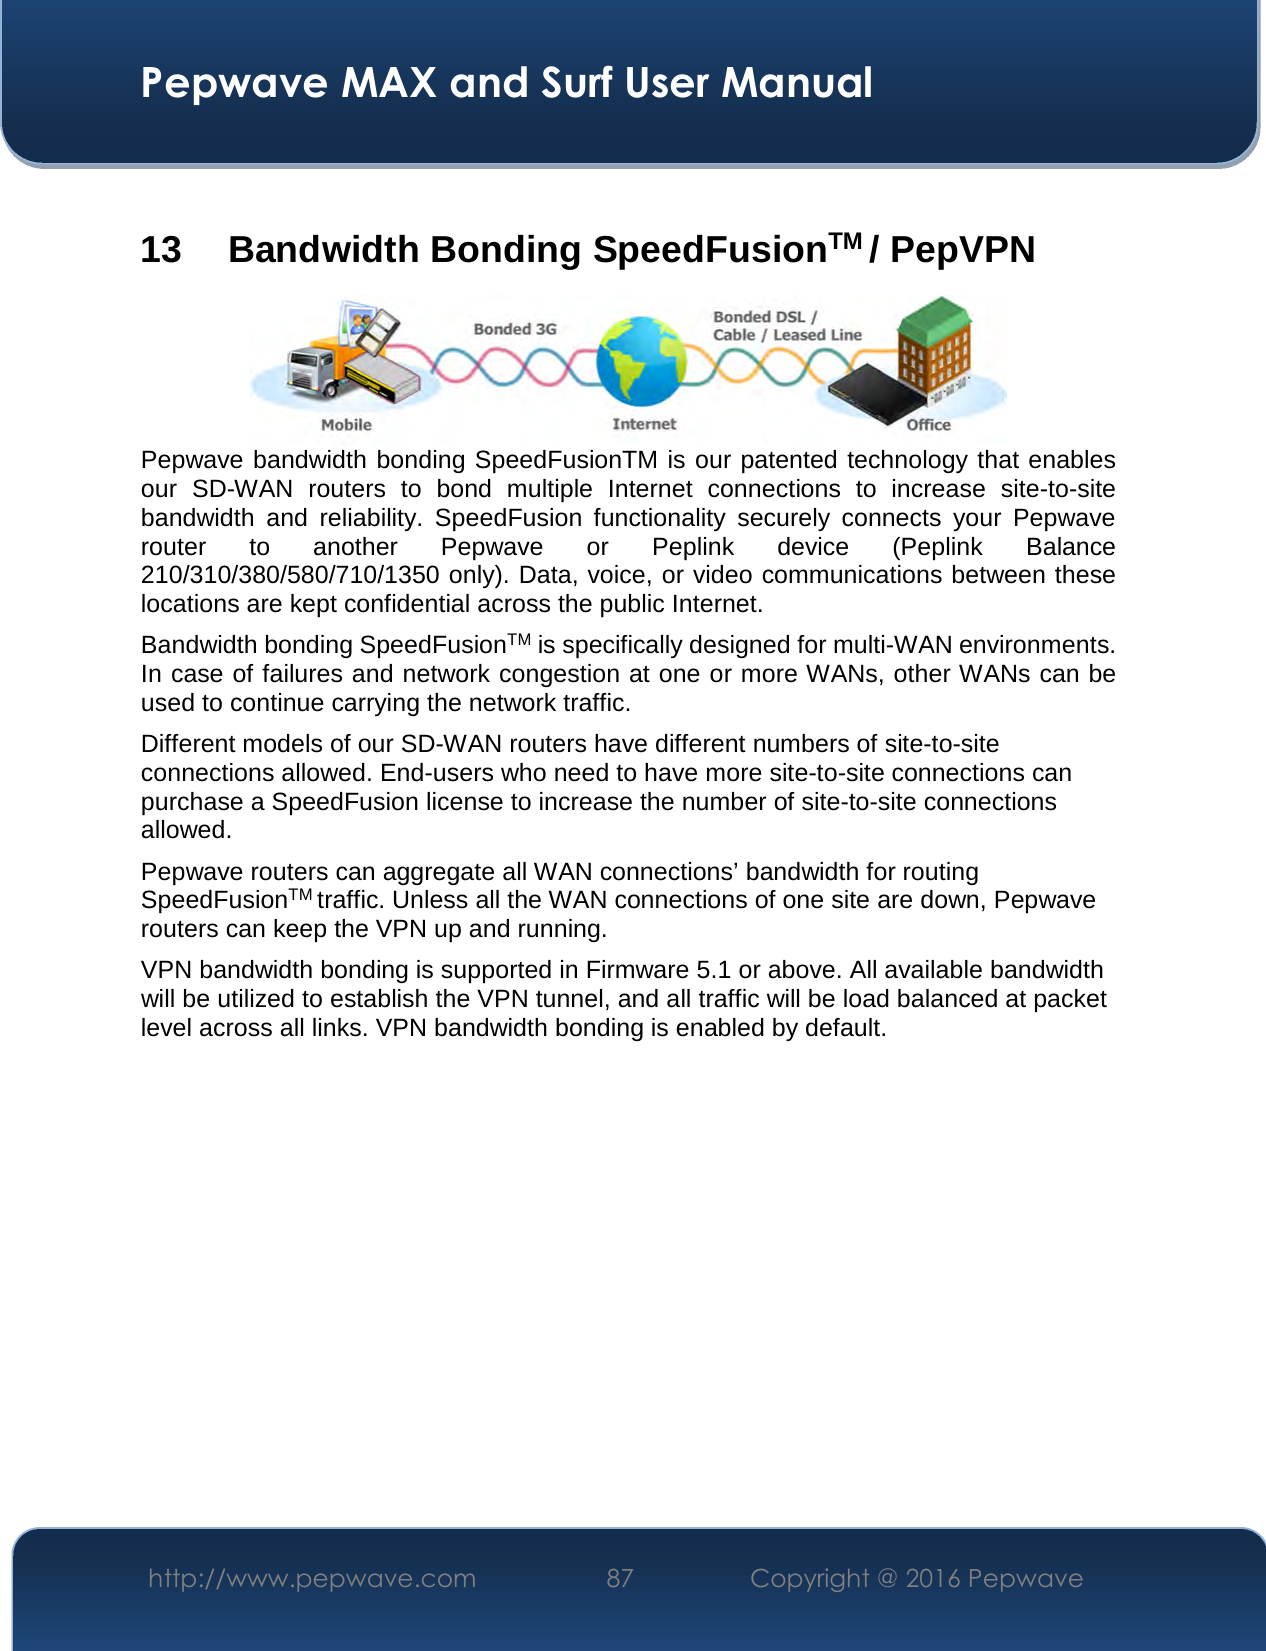  Pepwave MAX and Surf User Manual http://www.pepwave.com  87    Copyright @ 2016 Pepwave    13  Bandwidth Bonding SpeedFusionTM / PepVPN  Pepwave bandwidth bonding SpeedFusionTM is our patented technology that enables our  SD-WAN  routers  to  bond  multiple  Internet  connections  to  increase  site-to-site bandwidth  and  reliability.  SpeedFusion  functionality  securely  connects  your  Pepwave router  to  another  Pepwave  or  Peplink  device  (Peplink  Balance 210/310/380/580/710/1350 only). Data, voice, or video communications between these locations are kept confidential across the public Internet. Bandwidth bonding SpeedFusionTM is specifically designed for multi-WAN environments. In case of failures and network congestion at one or more WANs, other WANs can be used to continue carrying the network traffic.   Different models of our SD-WAN routers have different numbers of site-to-site connections allowed. End-users who need to have more site-to-site connections can purchase a SpeedFusion license to increase the number of site-to-site connections allowed. Pepwave routers can aggregate all WAN connections’ bandwidth for routing SpeedFusionTM traffic. Unless all the WAN connections of one site are down, Pepwave routers can keep the VPN up and running. VPN bandwidth bonding is supported in Firmware 5.1 or above. All available bandwidth will be utilized to establish the VPN tunnel, and all traffic will be load balanced at packet level across all links. VPN bandwidth bonding is enabled by default.     